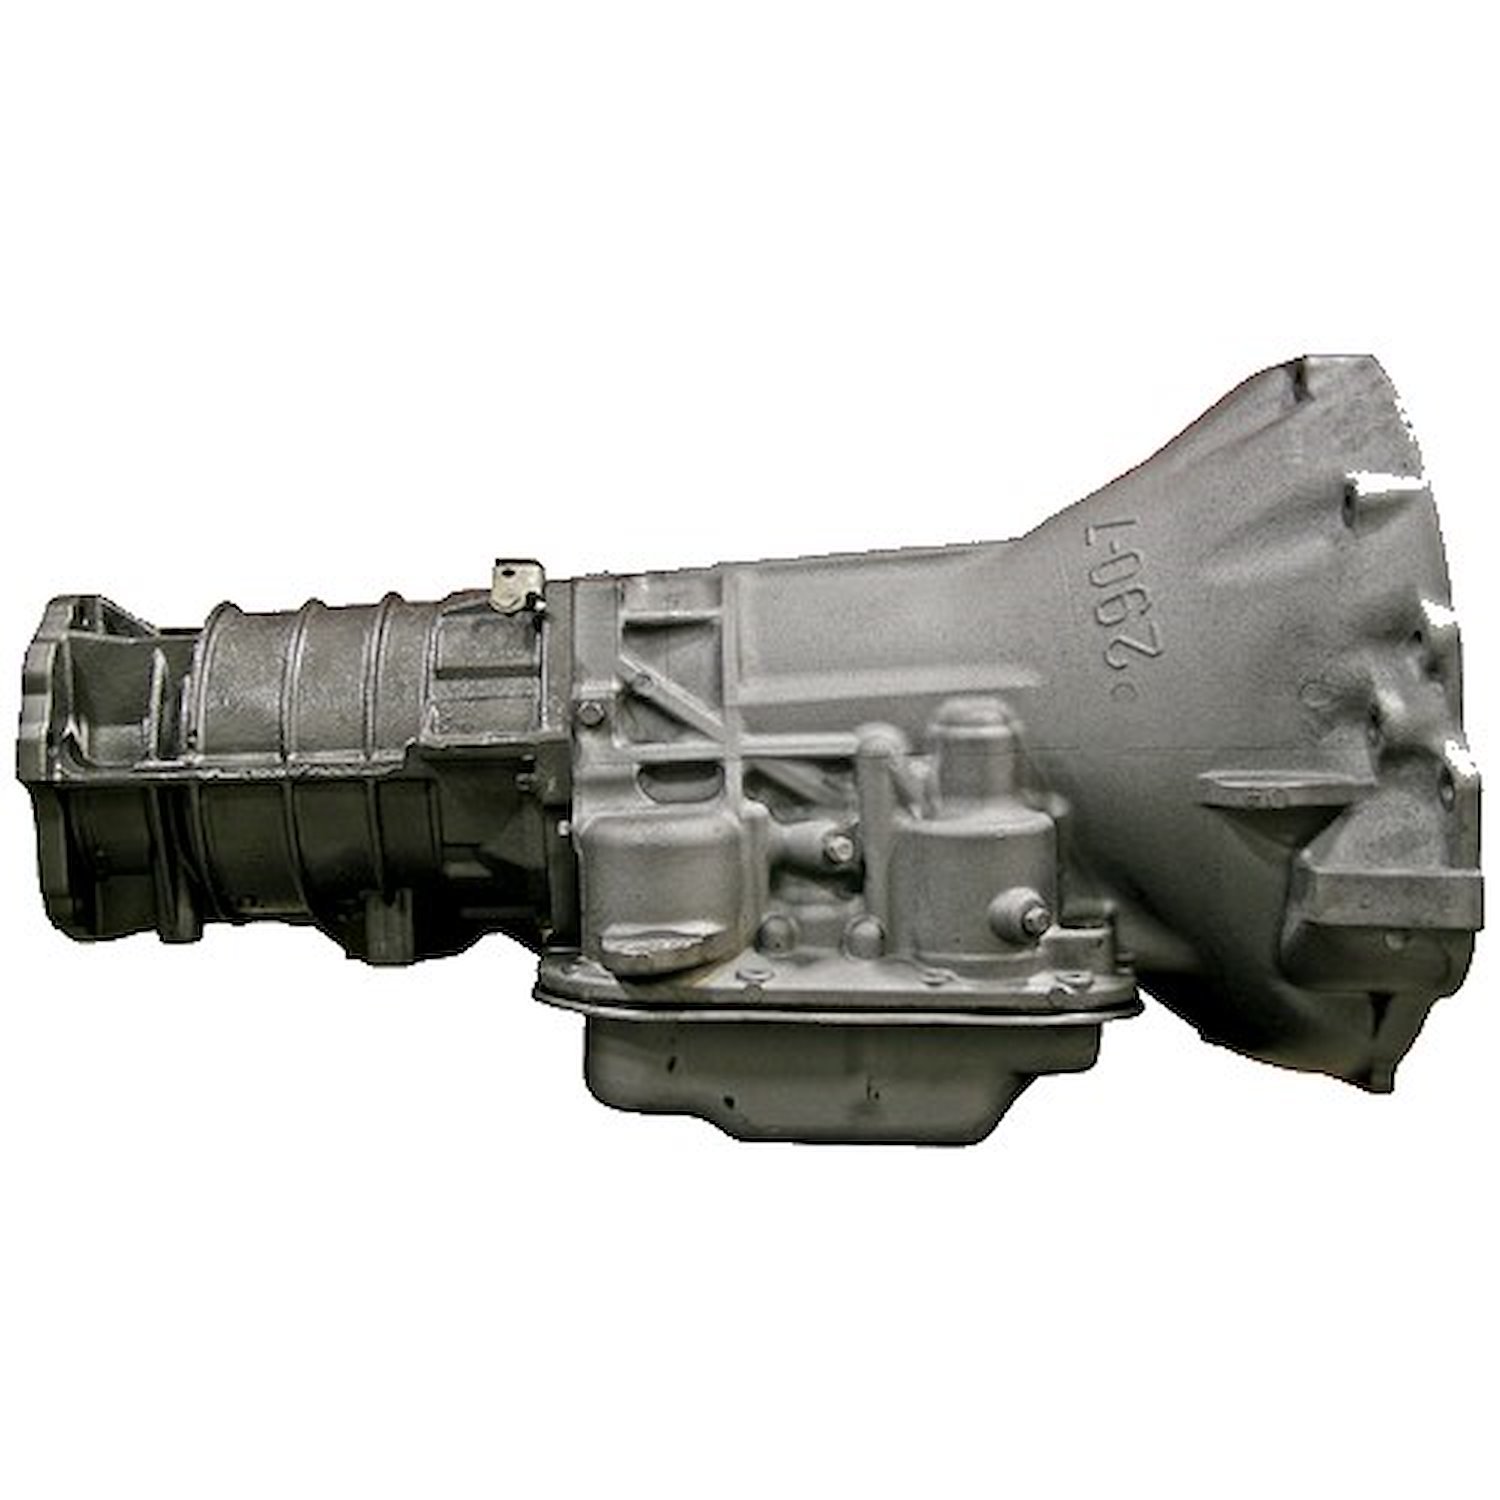 42RE Reman Auto Trans Fits 1993-1995 Jeep Grand Cherokee w/4.0L 242 6cyl. Eng. [4WD]